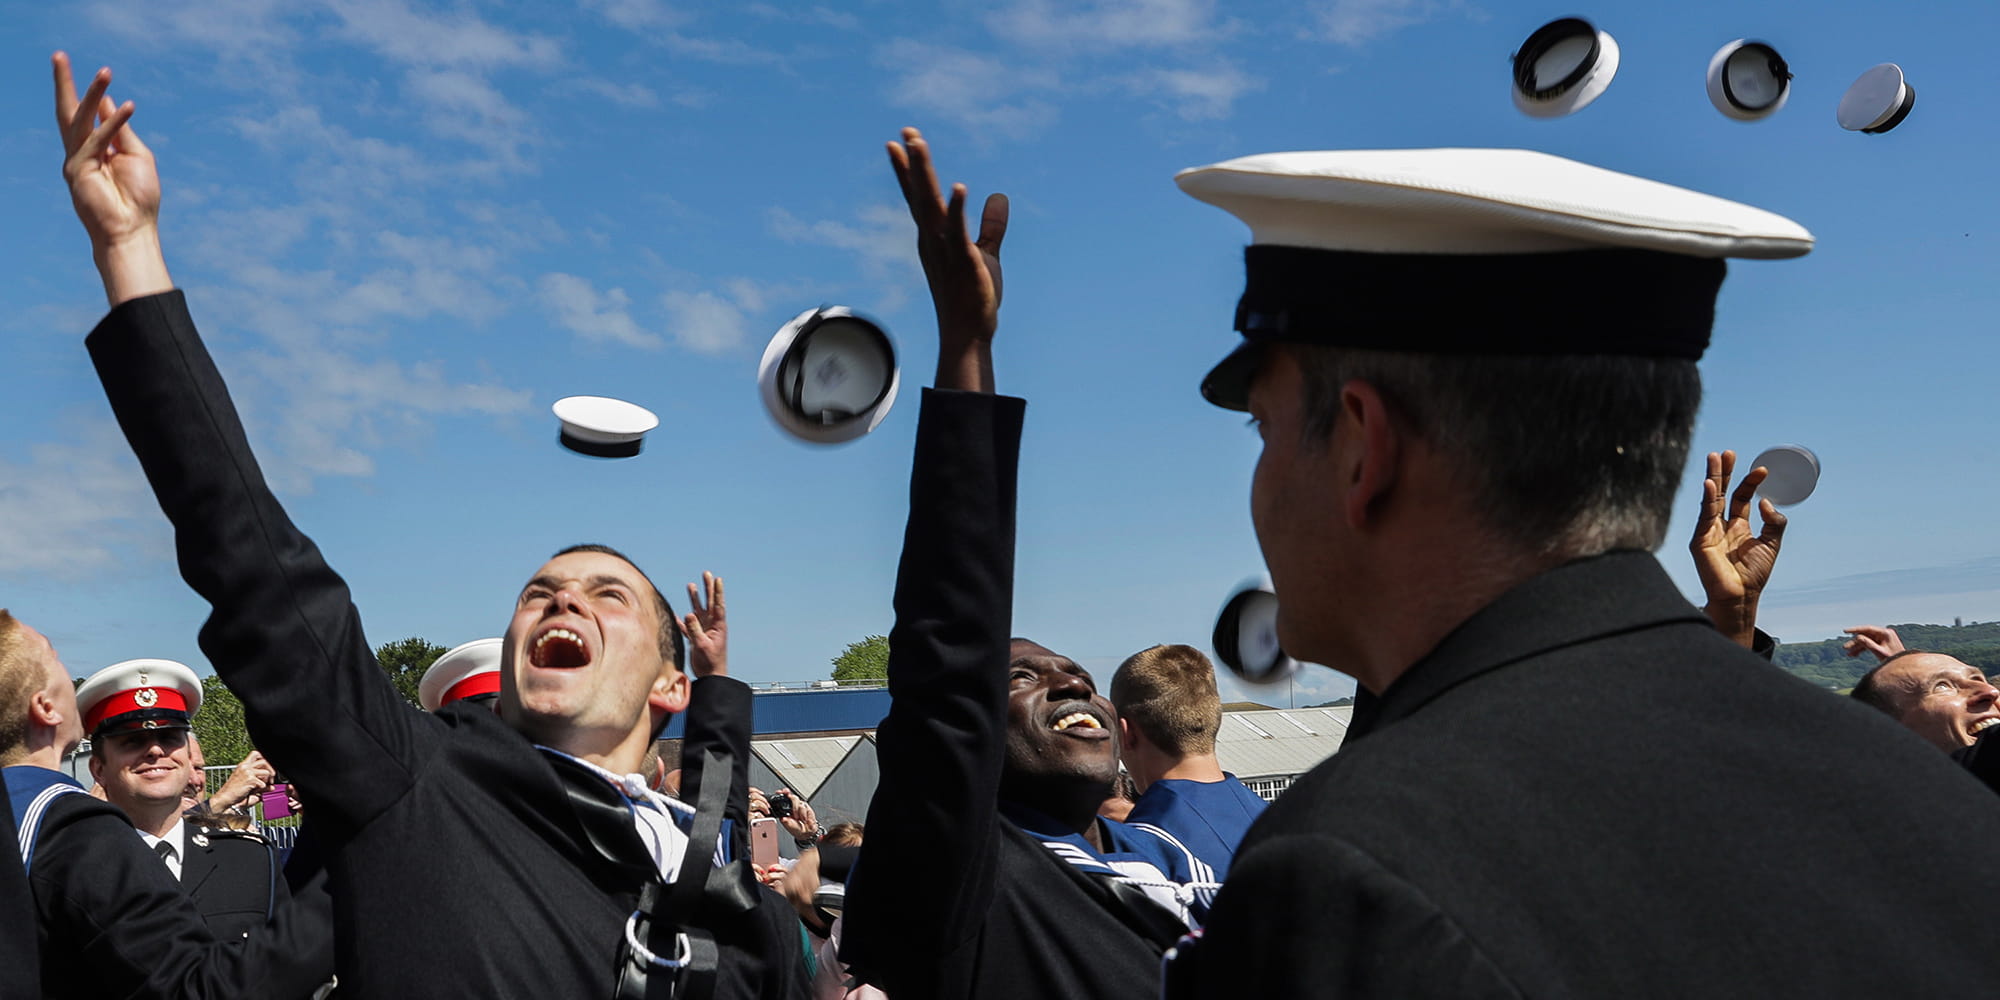 Trainee sailors celebrating at passing out parade throwing their hats in the air